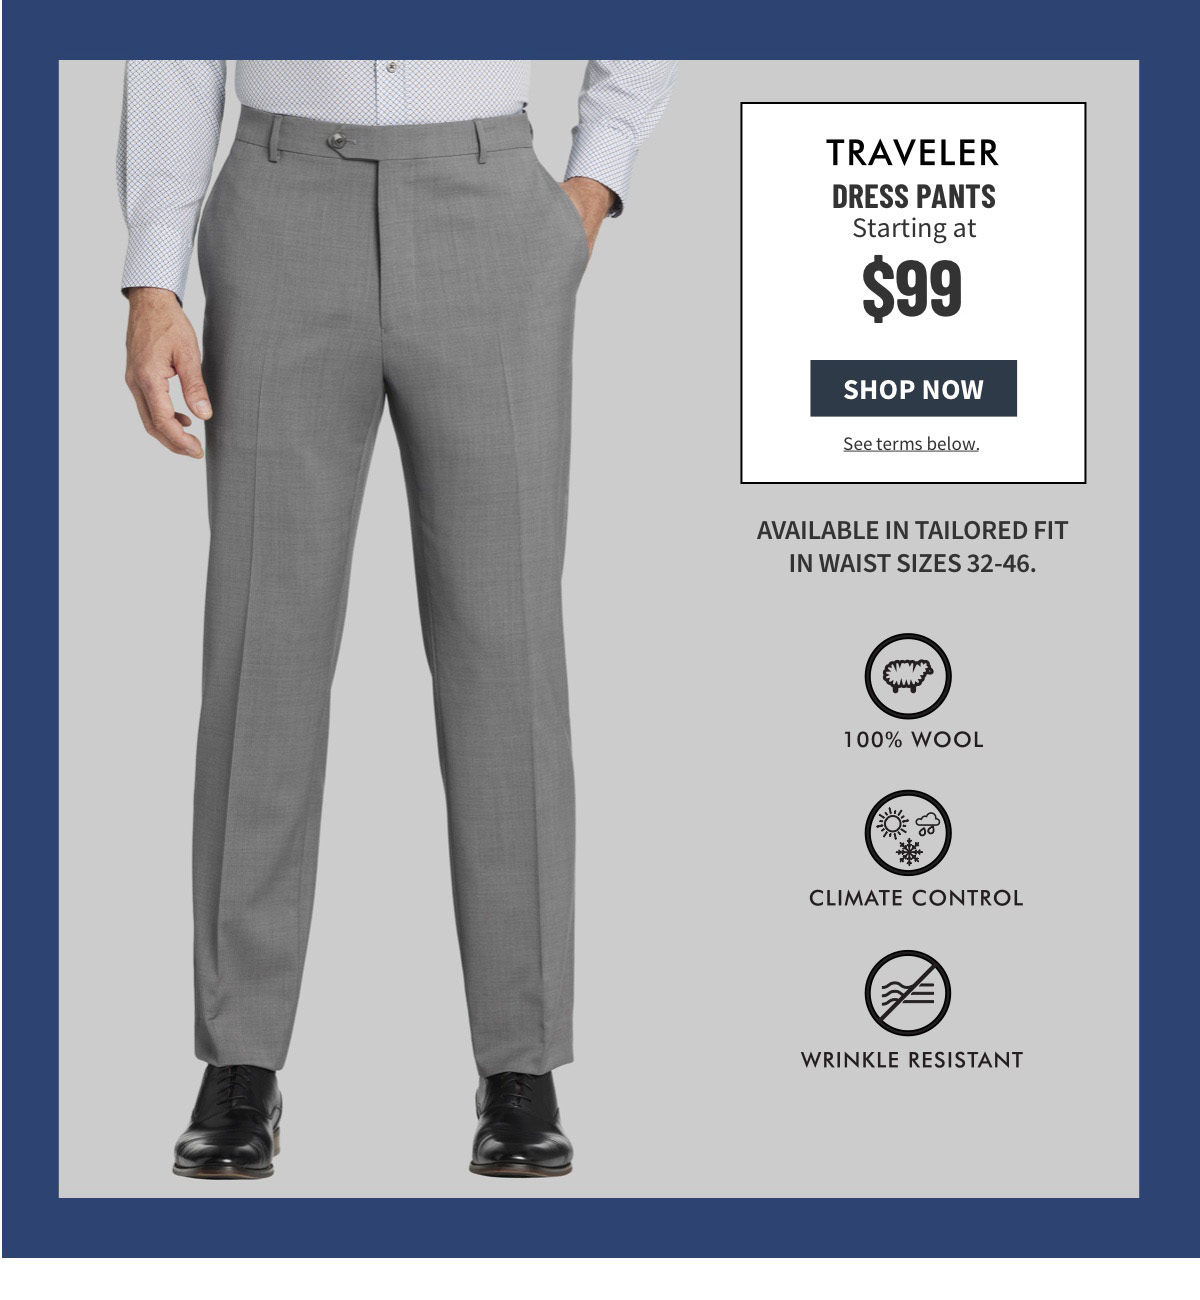 Traveler Dress Pants $99 Shop Now See terms below. Available in Tailored Fit in sizes 30-48 waist. 100% Wool Climate Control Wrinkle Resistant